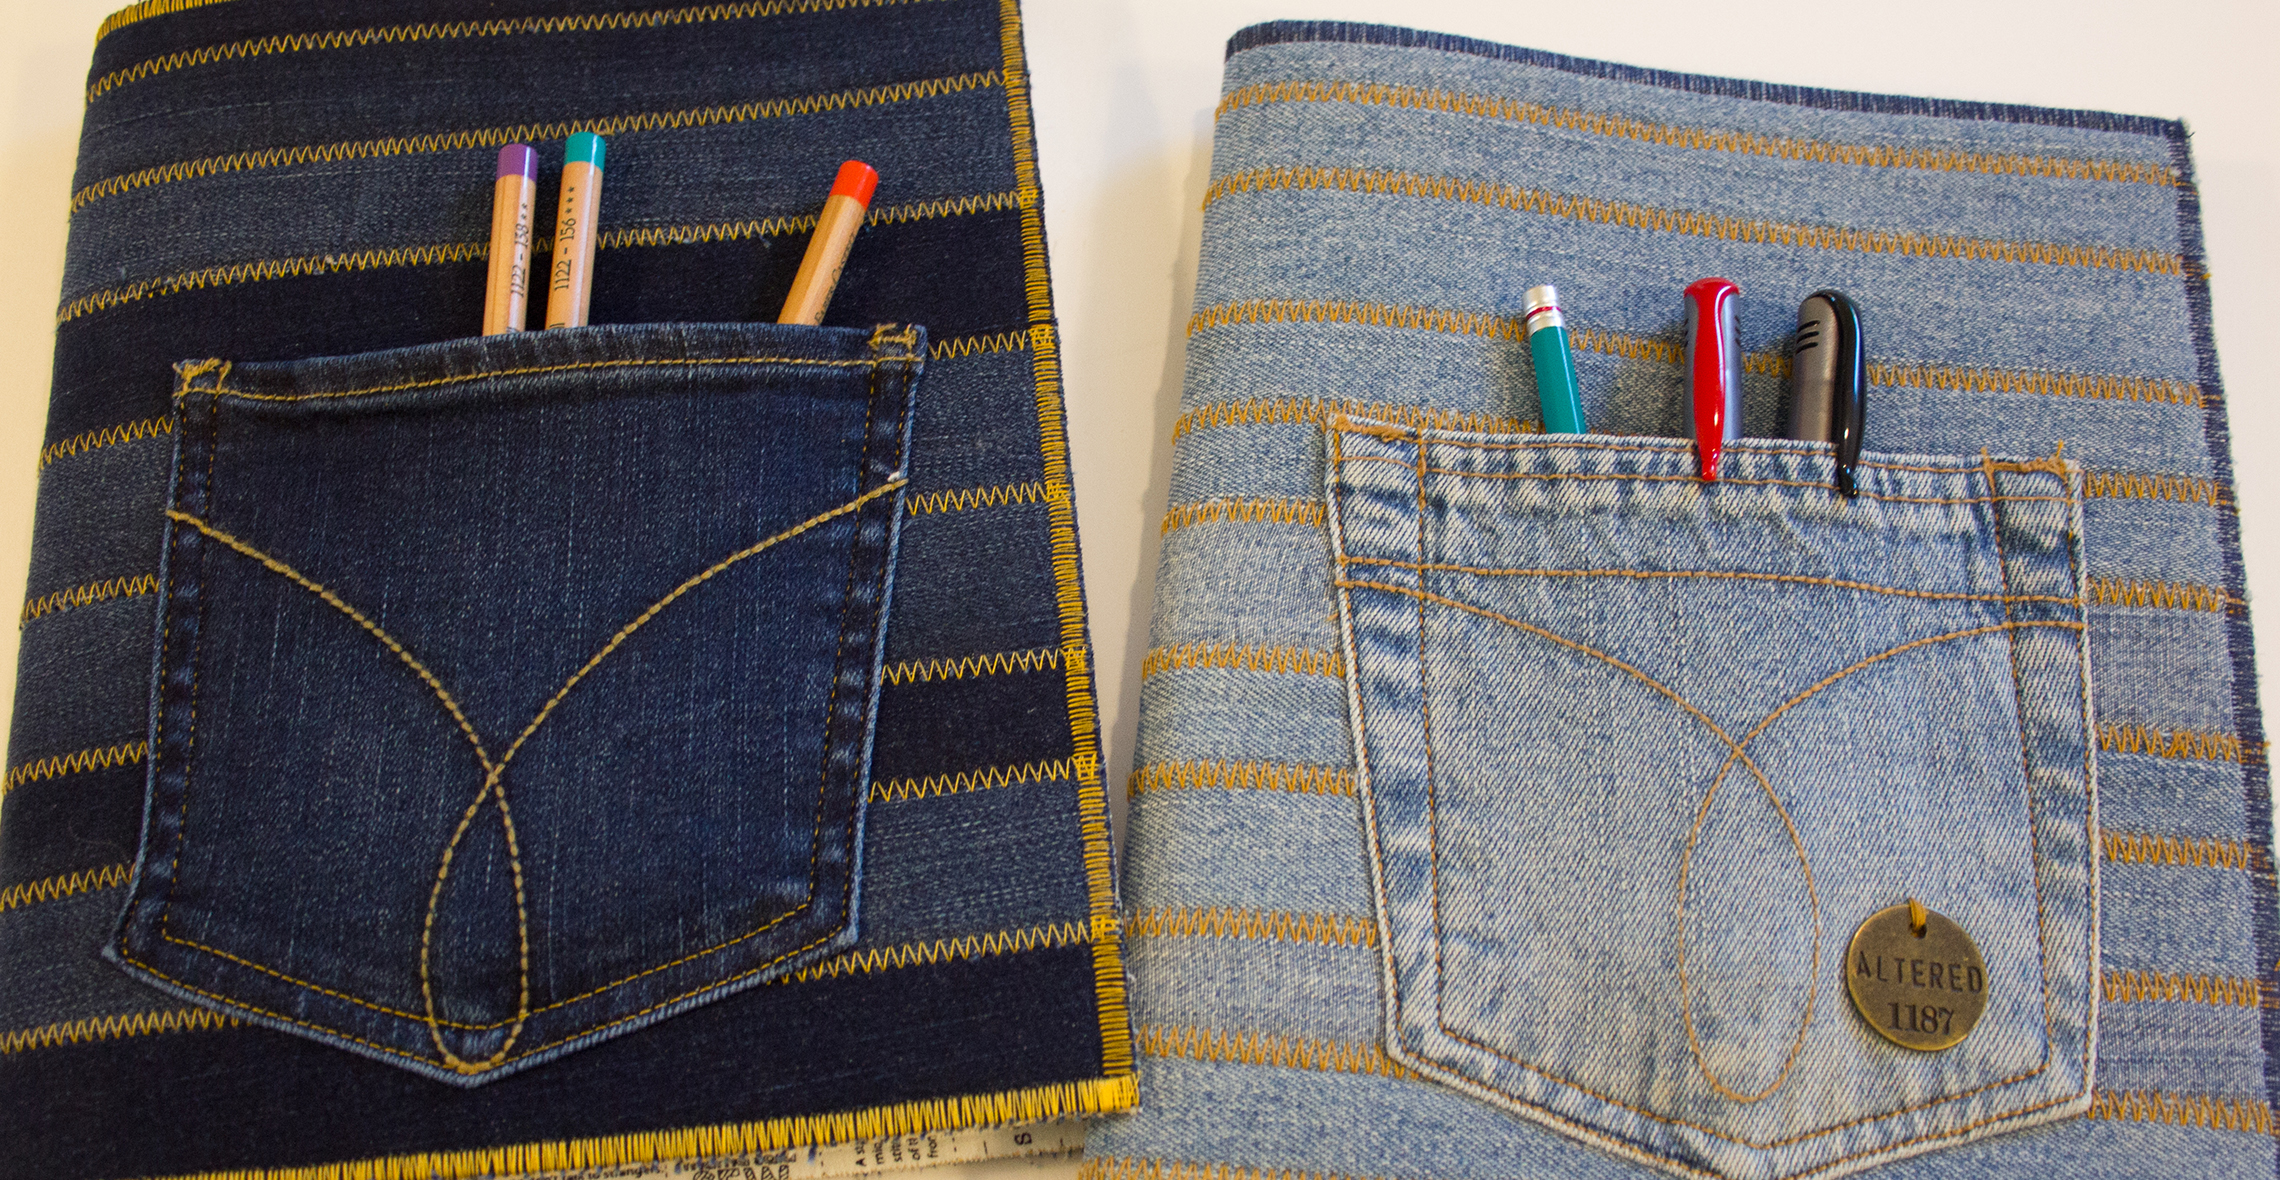 Jeans Composition Book Cover